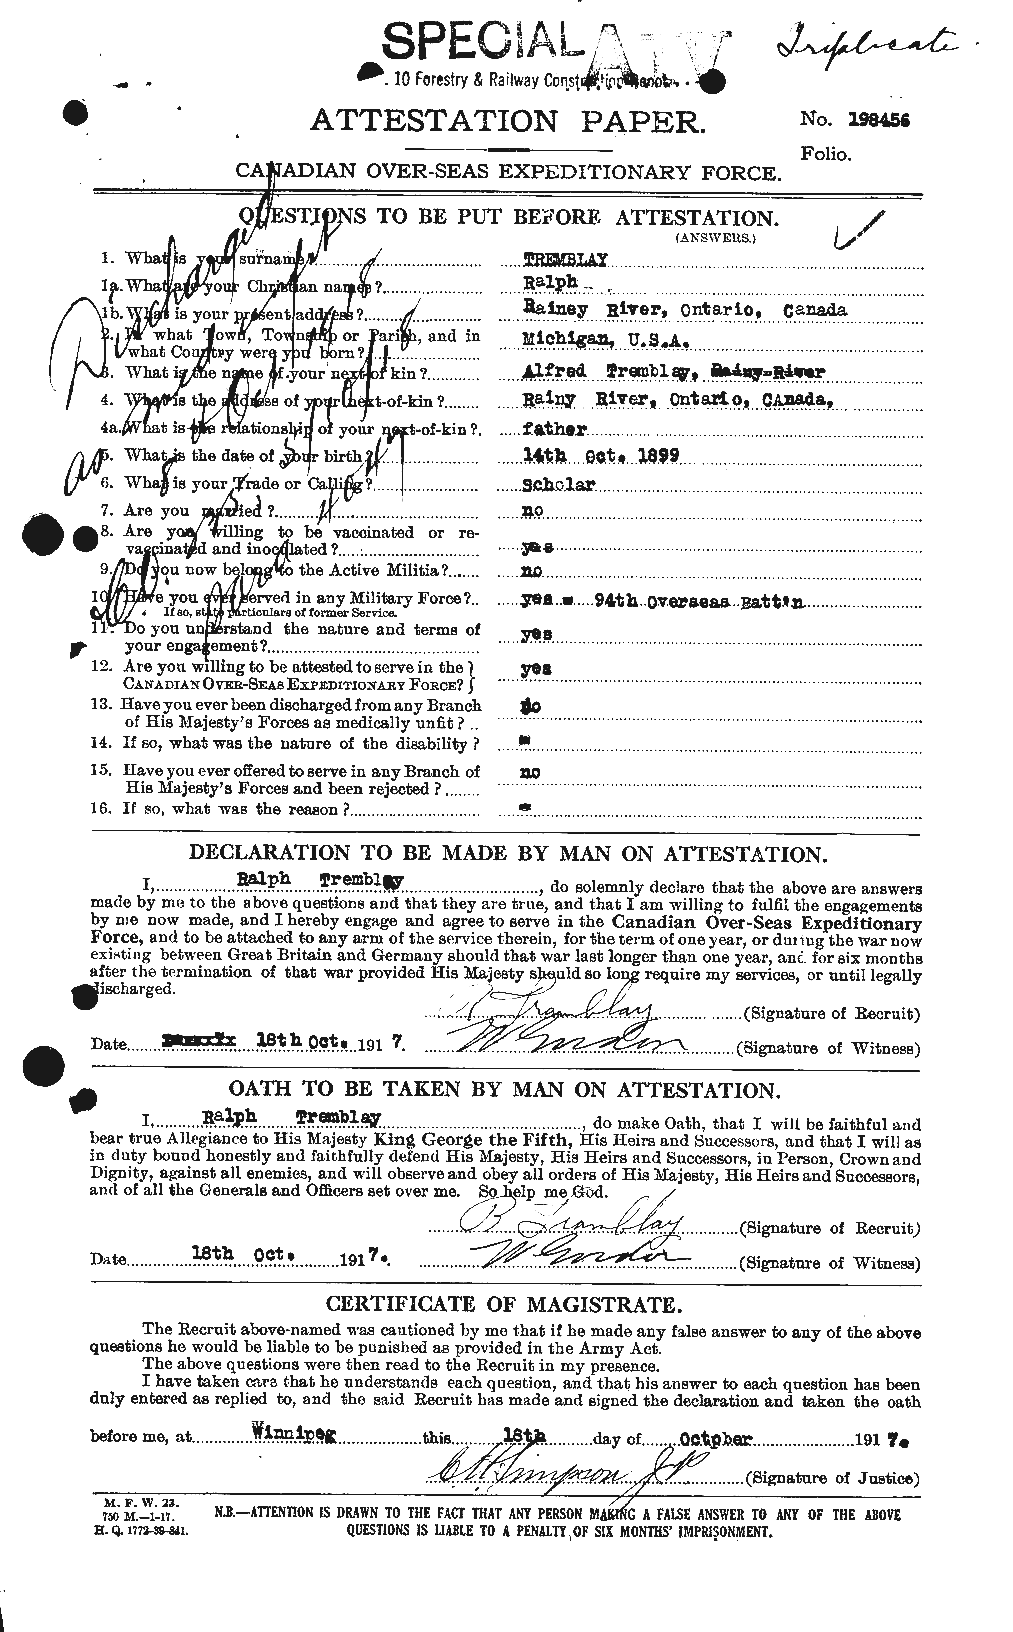 Personnel Records of the First World War - CEF 639245a